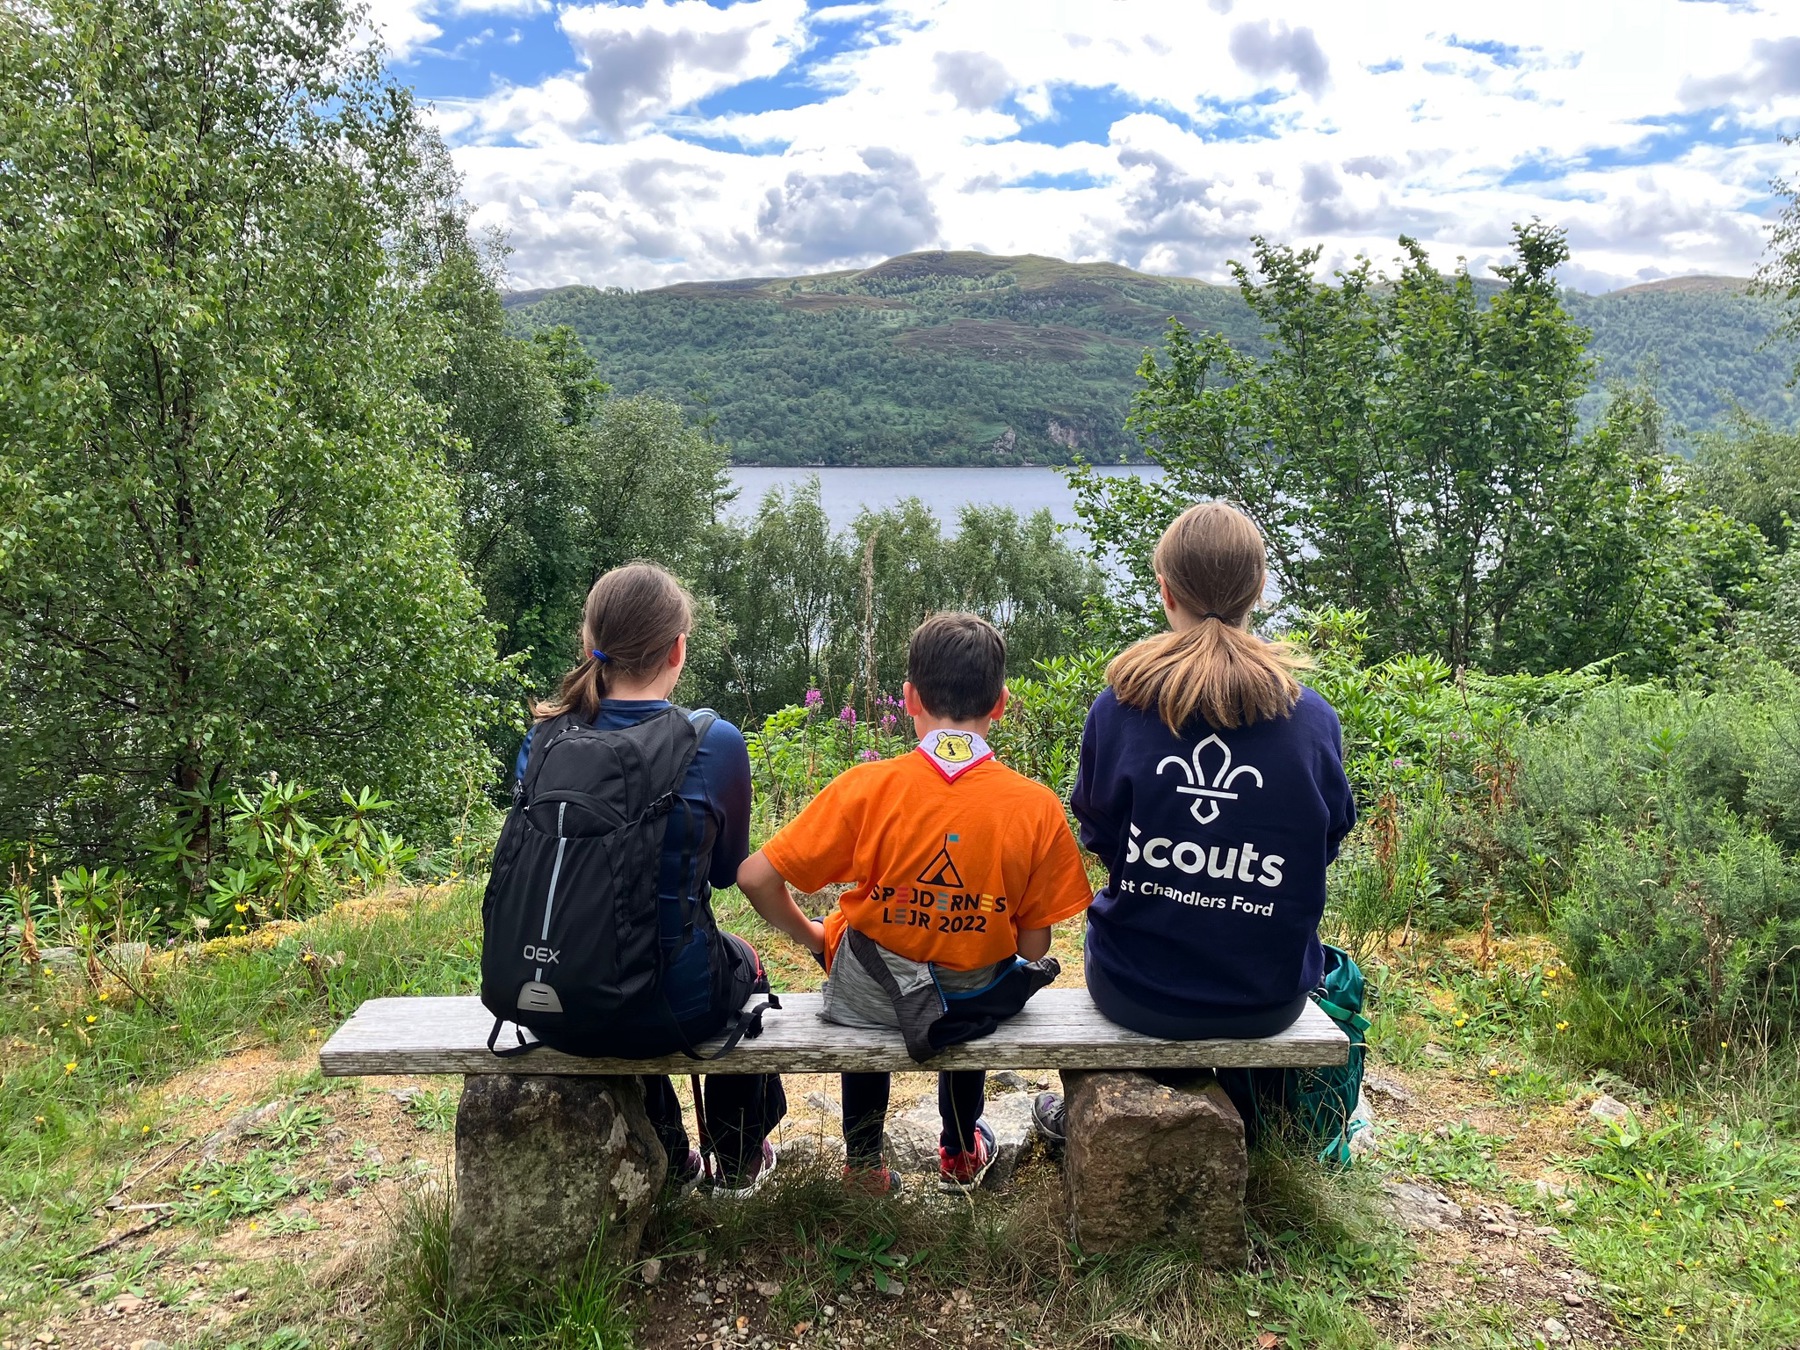 Hattie, Ollie and Bethan are sitting on a wooden bench surrounded by trees. We can see their backs as they look out at the view, with a lake in the distance.